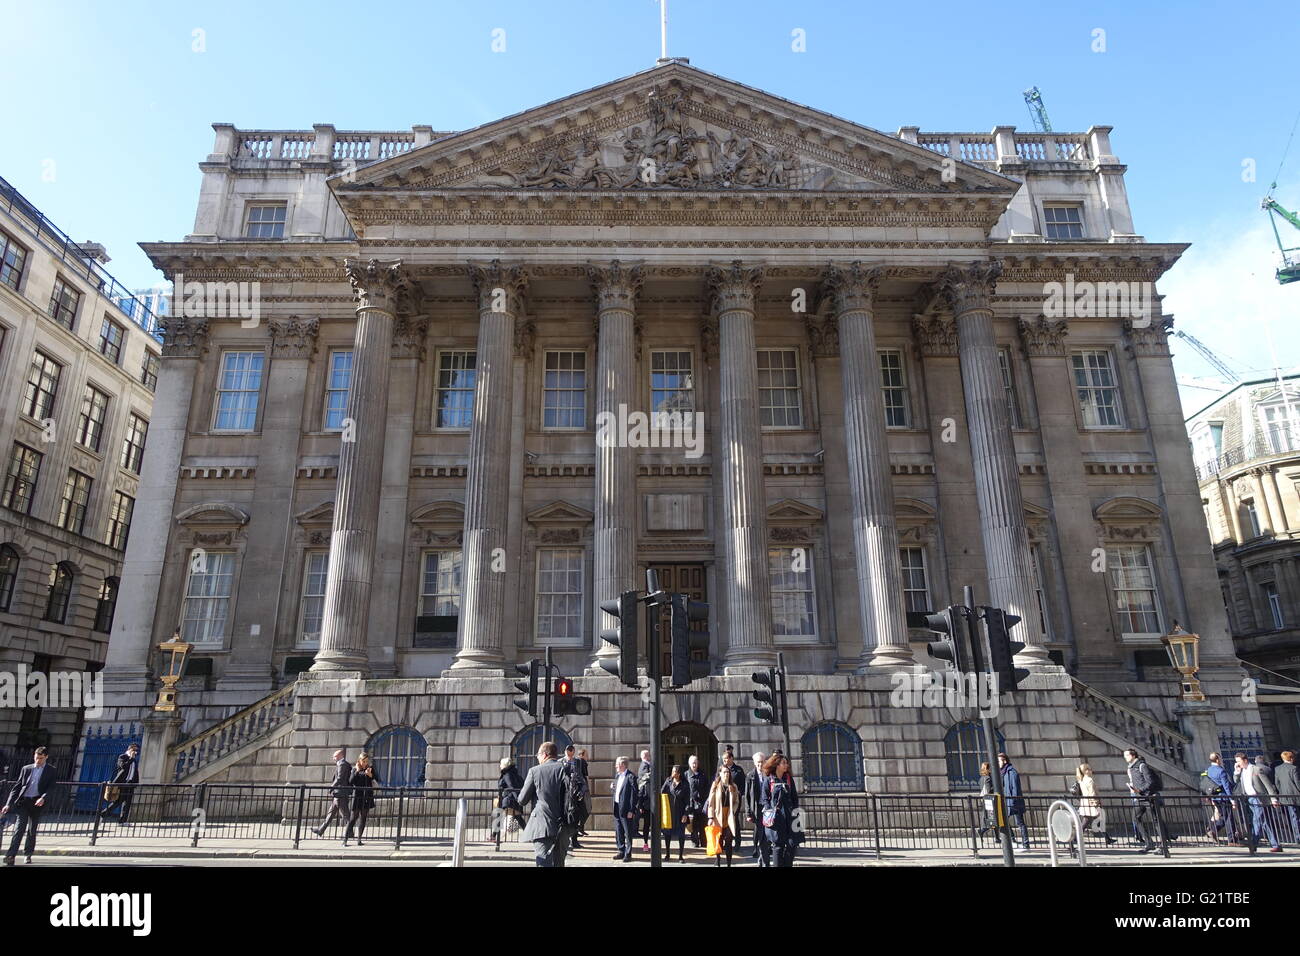 A front view of Mansion House in London Stock Photo